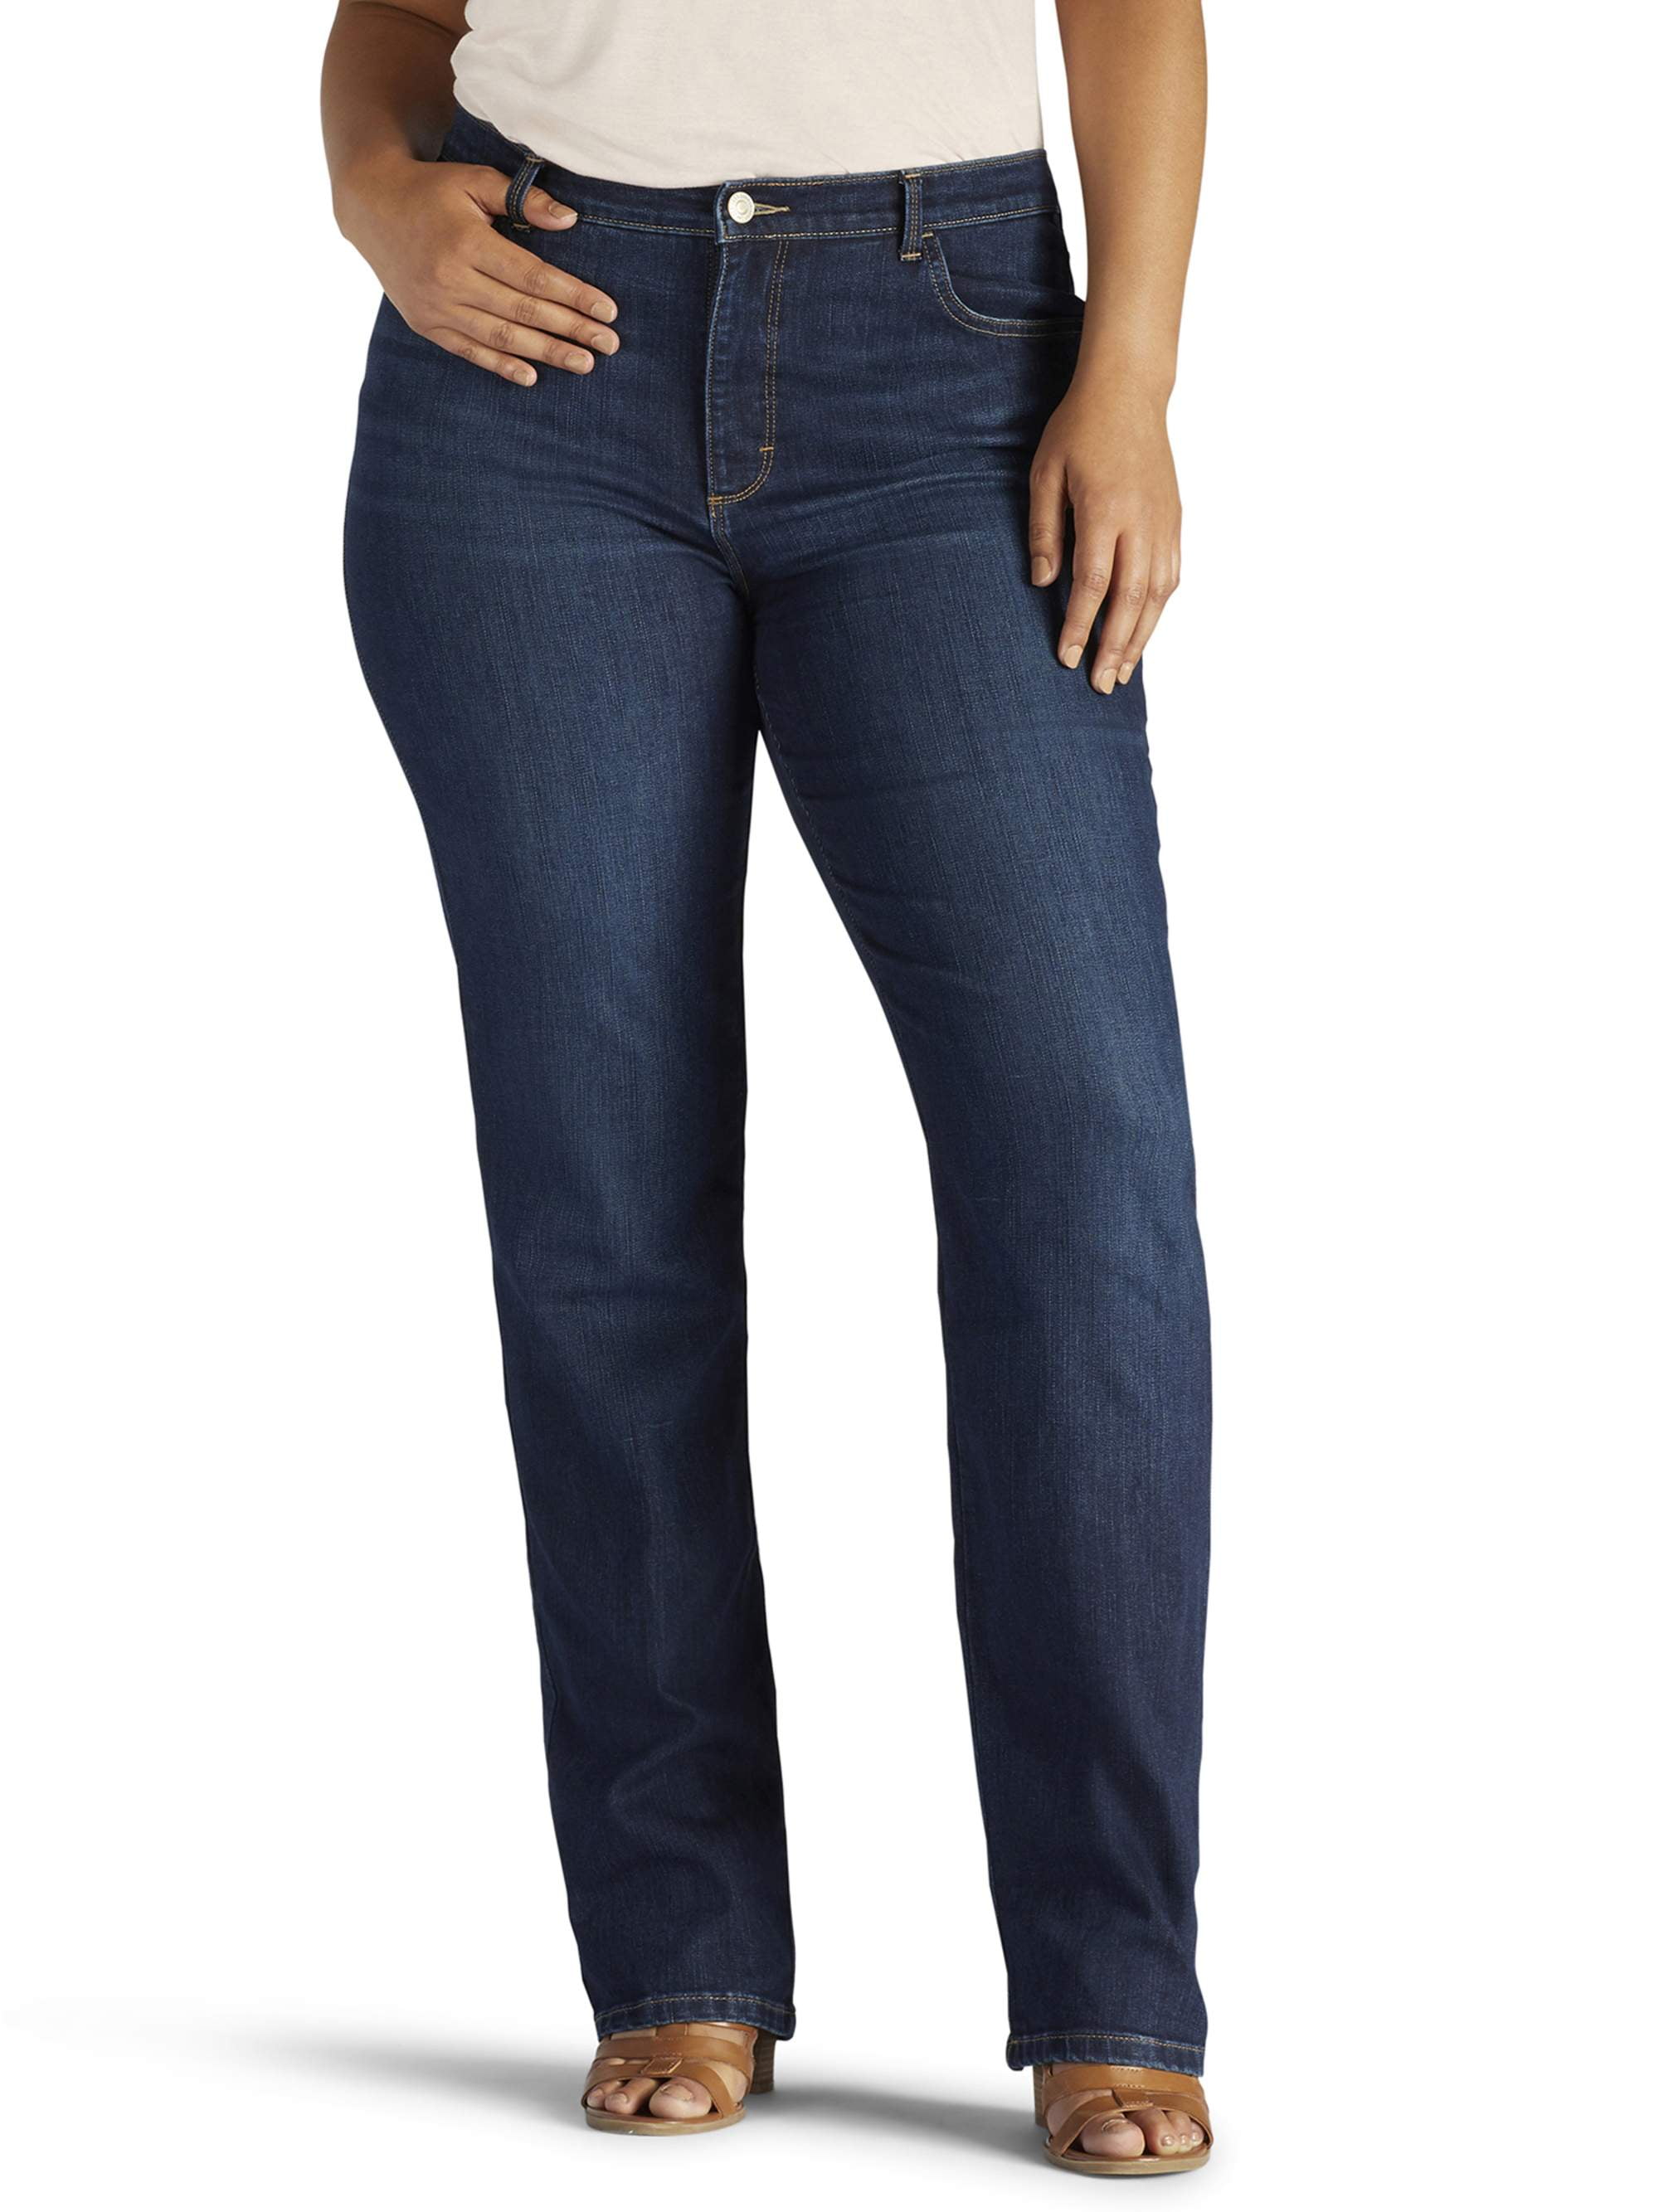 Lee Women's Plus Size Relaxed Fit Straight Leg Jean 